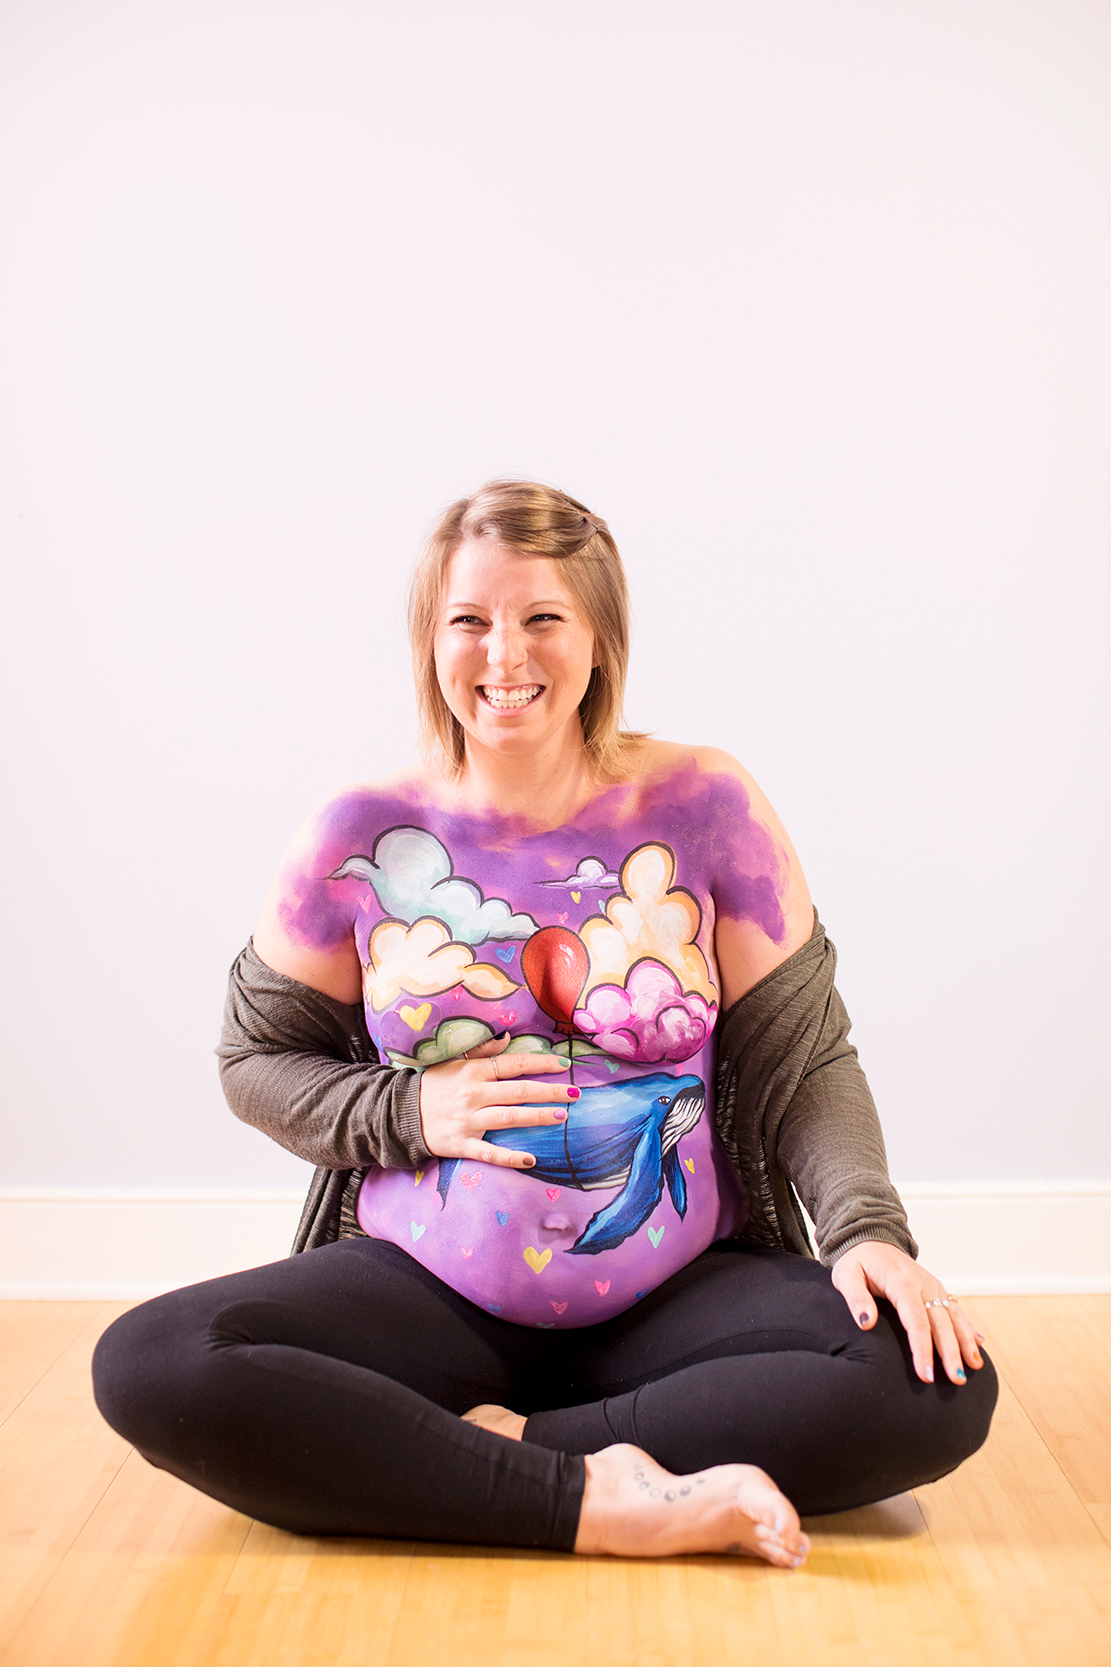 Body Painted Pregnant Belly Maternity Photo Shoot - Image Property of www.j-dphoto.com